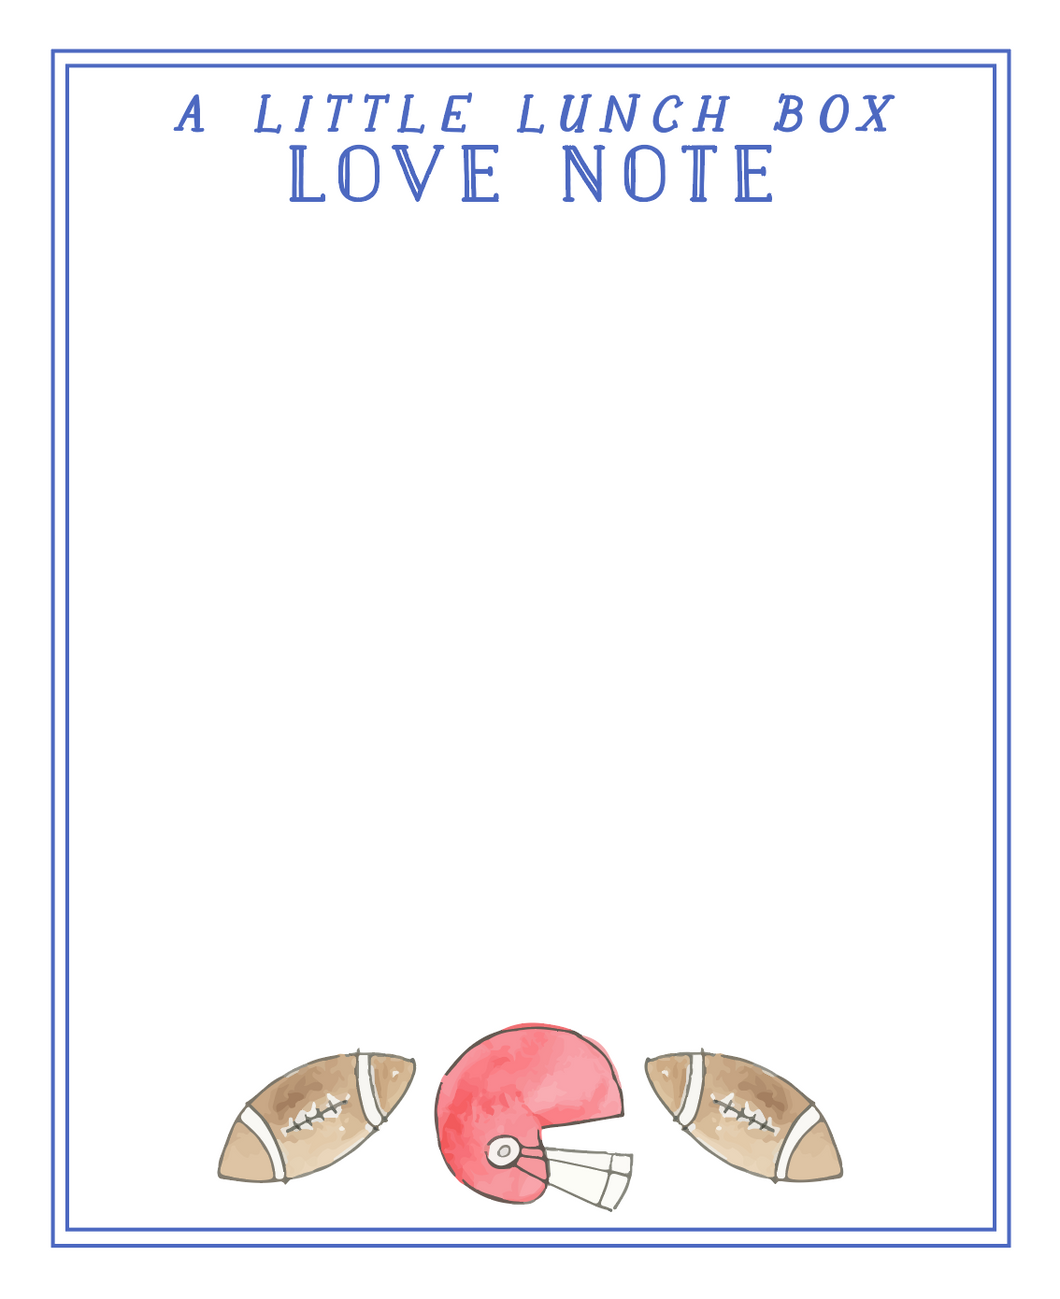 FOOTBALL LUNCH BOX LOVE NOTE PAD